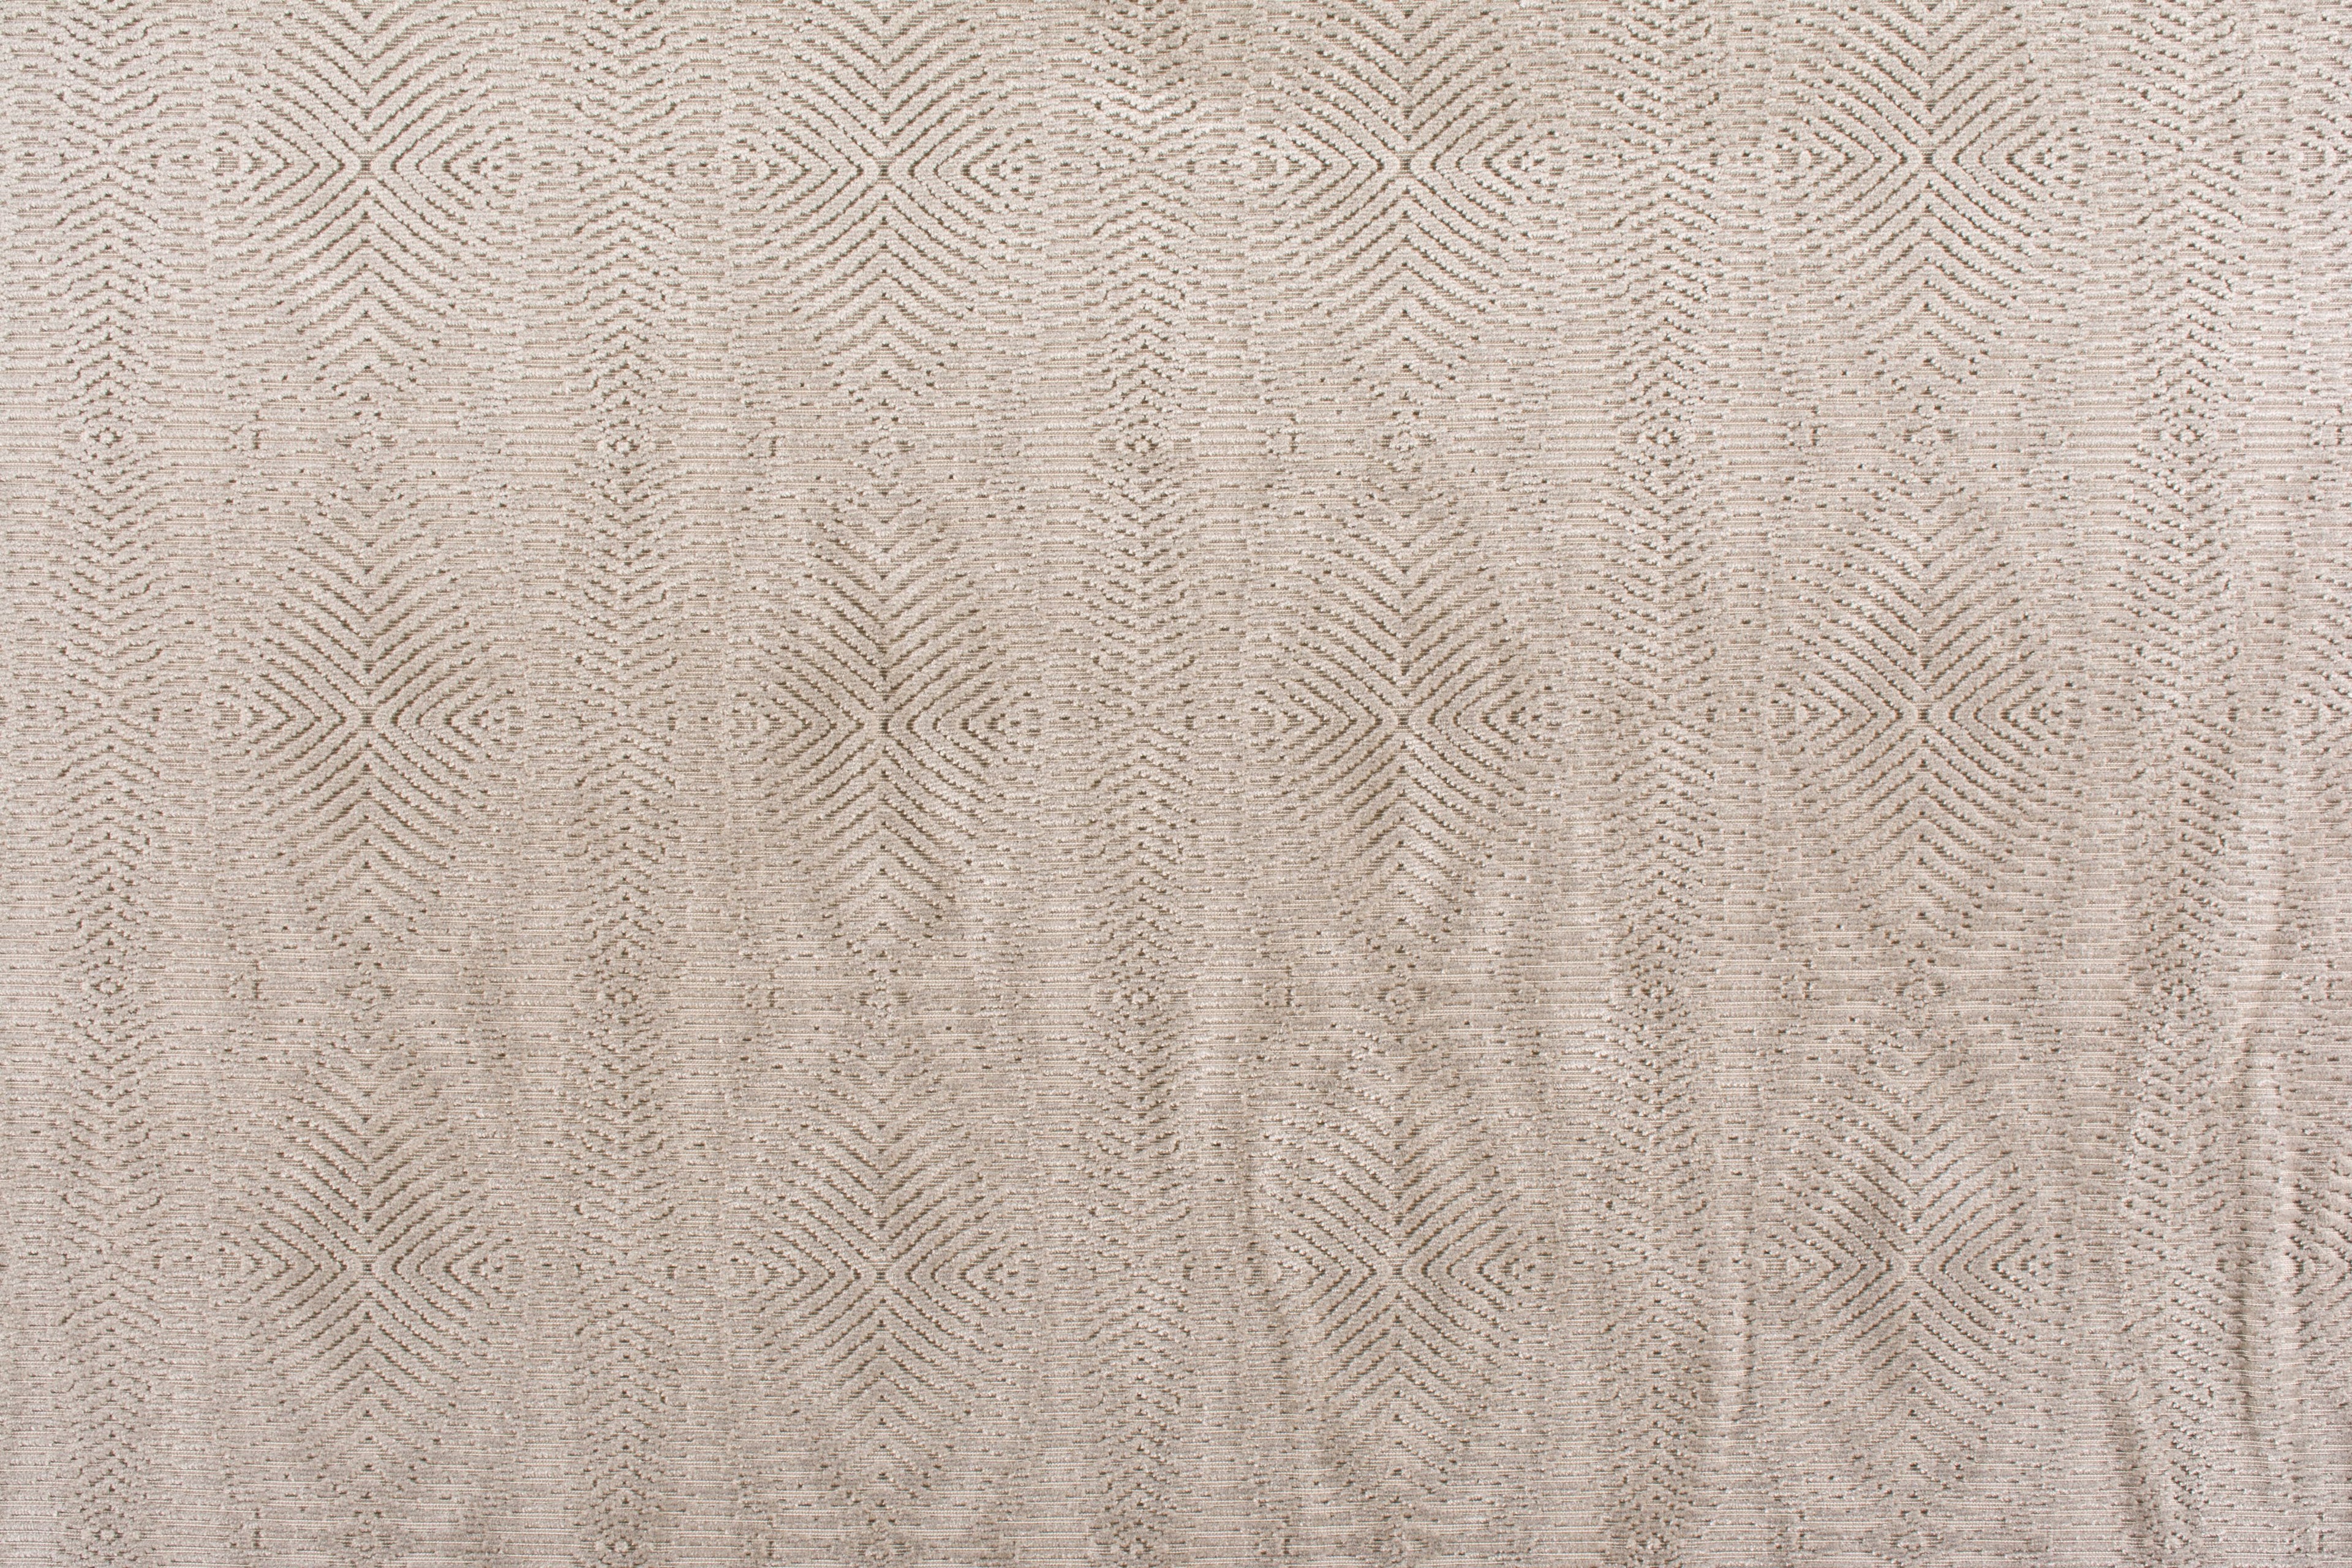 Cava fabric in grey smoke color - pattern number V4 00024020 - by Scalamandre in the Old World Weavers collection